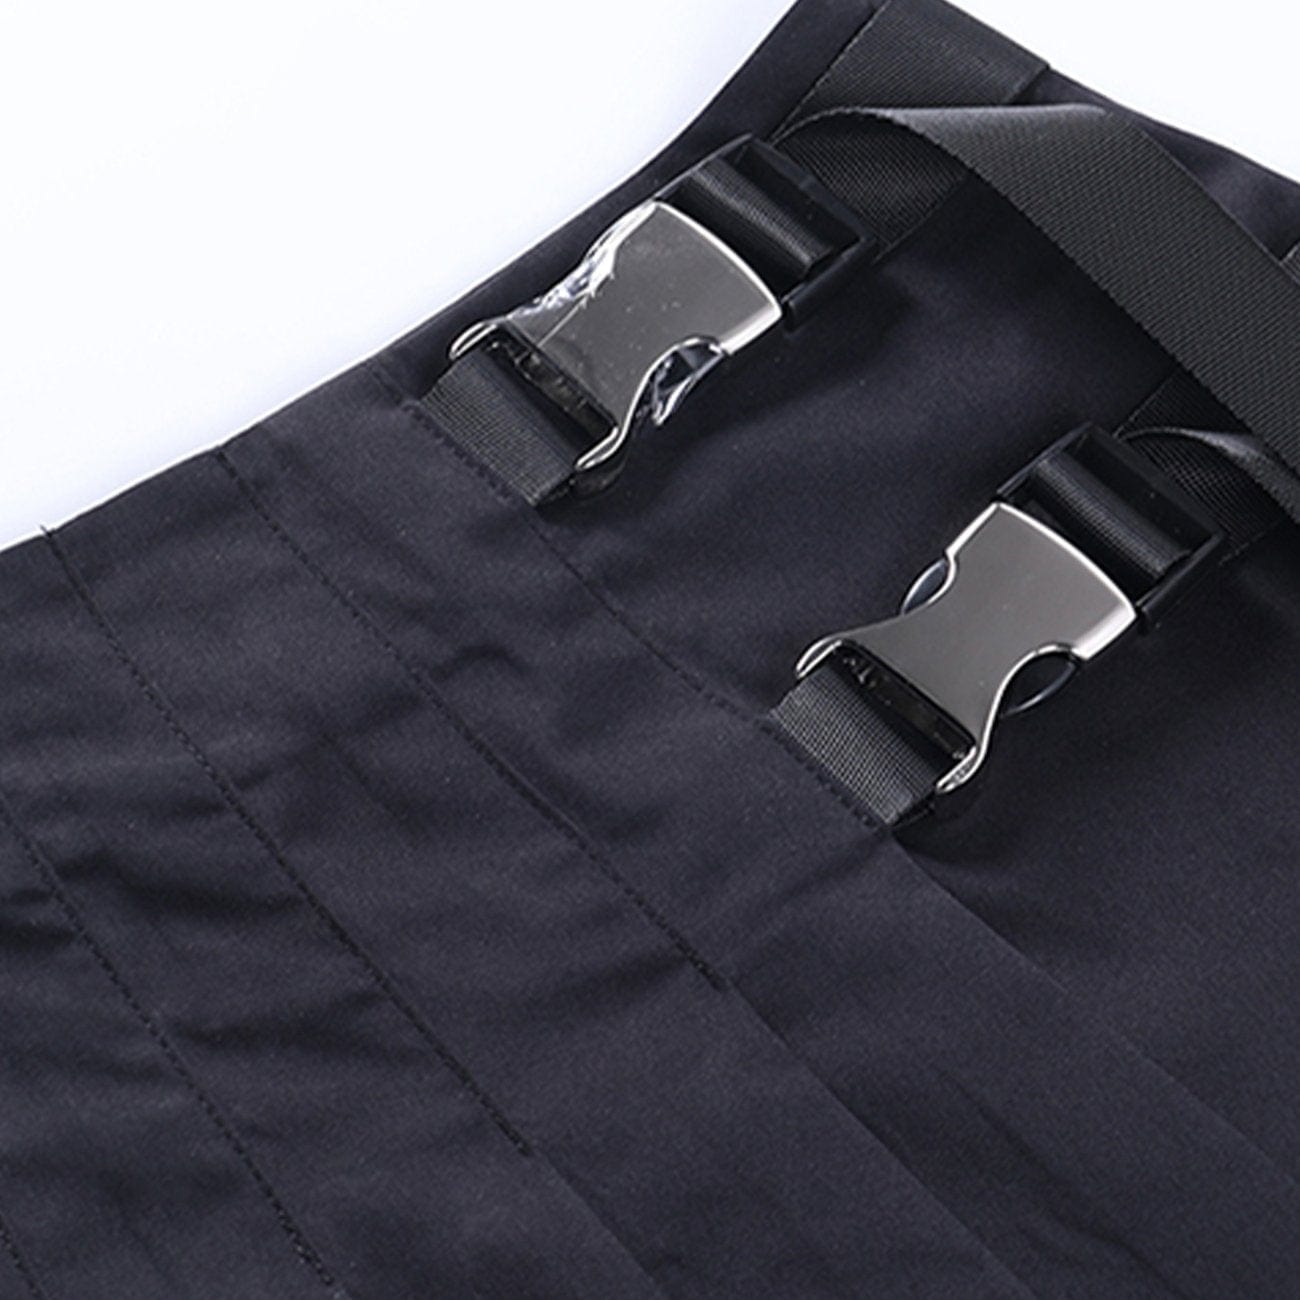 Adjustable Buckle Ribbons Pleated Skirt Streetwear Brand Techwear Combat Tactical YUGEN THEORY